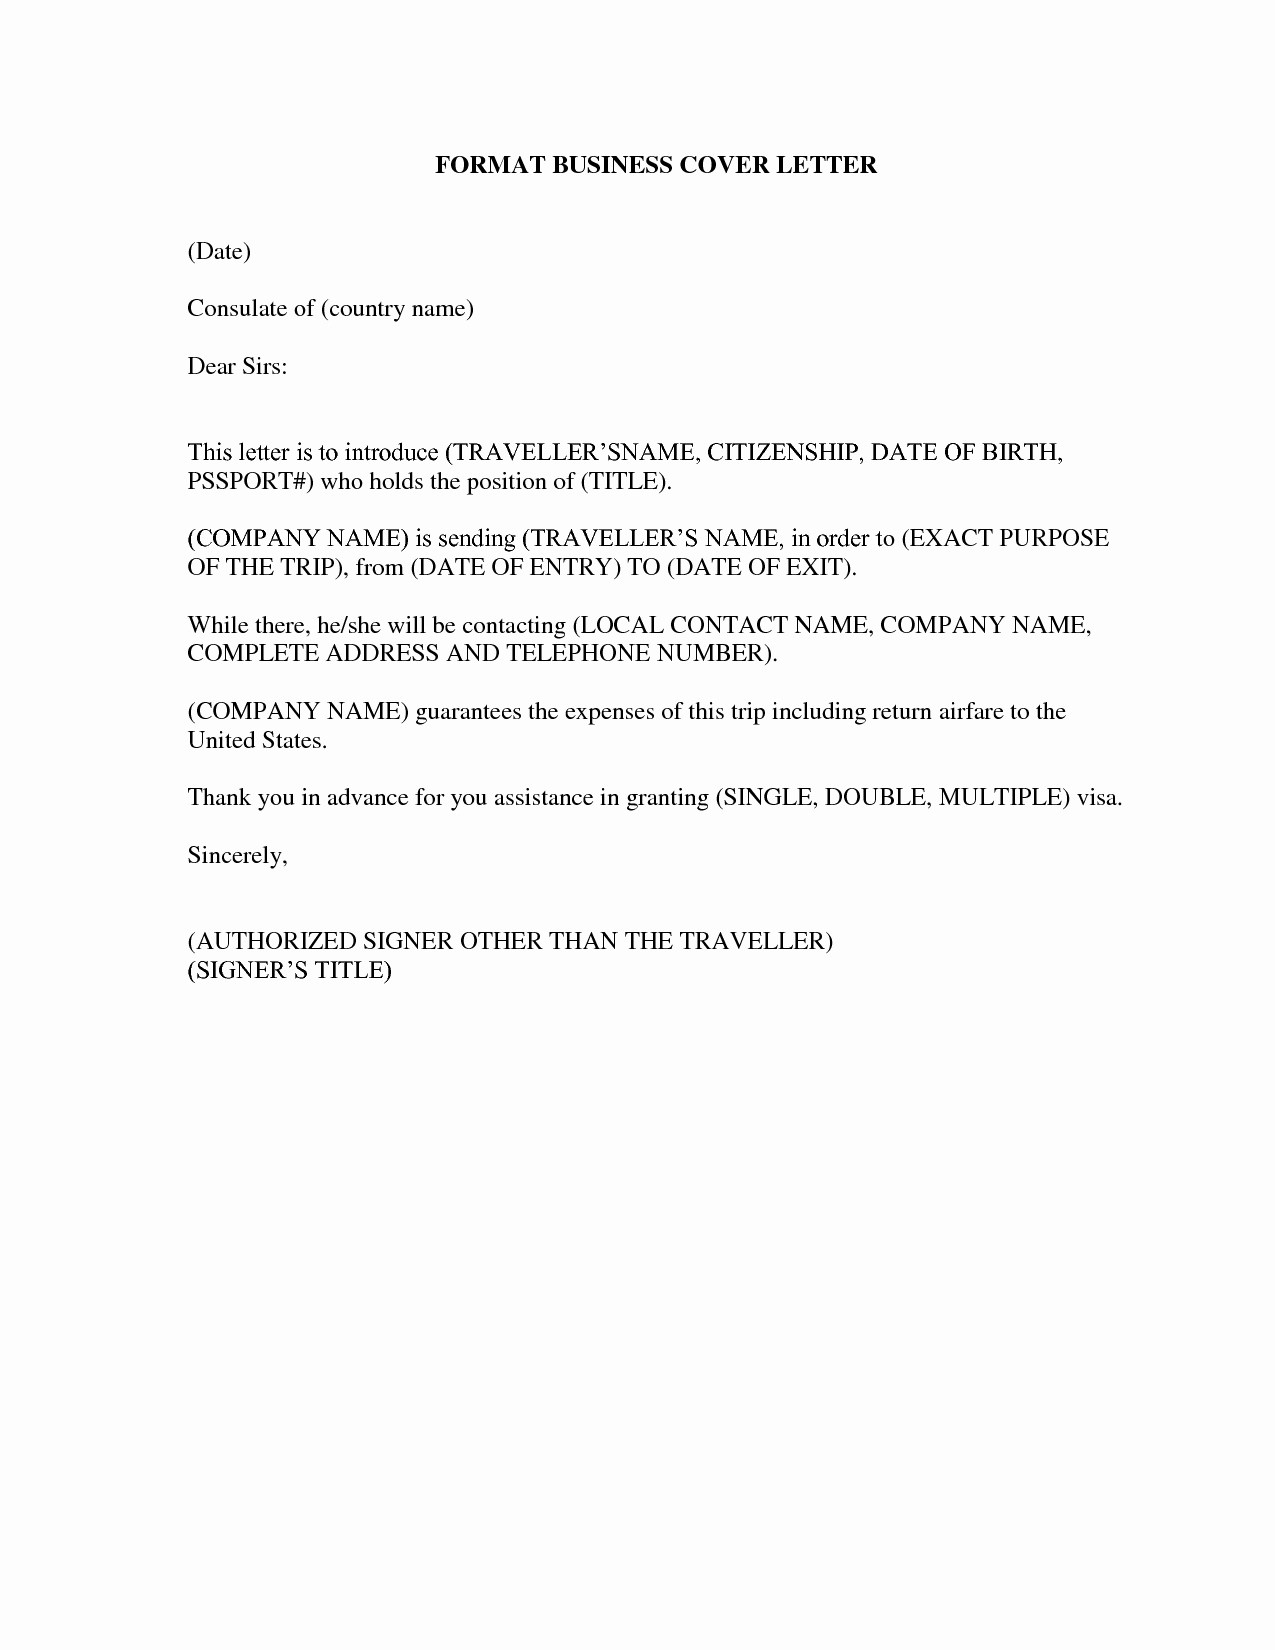 Business Cover Letter format New Pin by Онлайн Кинотеатр On Essay Writing Online 24 7